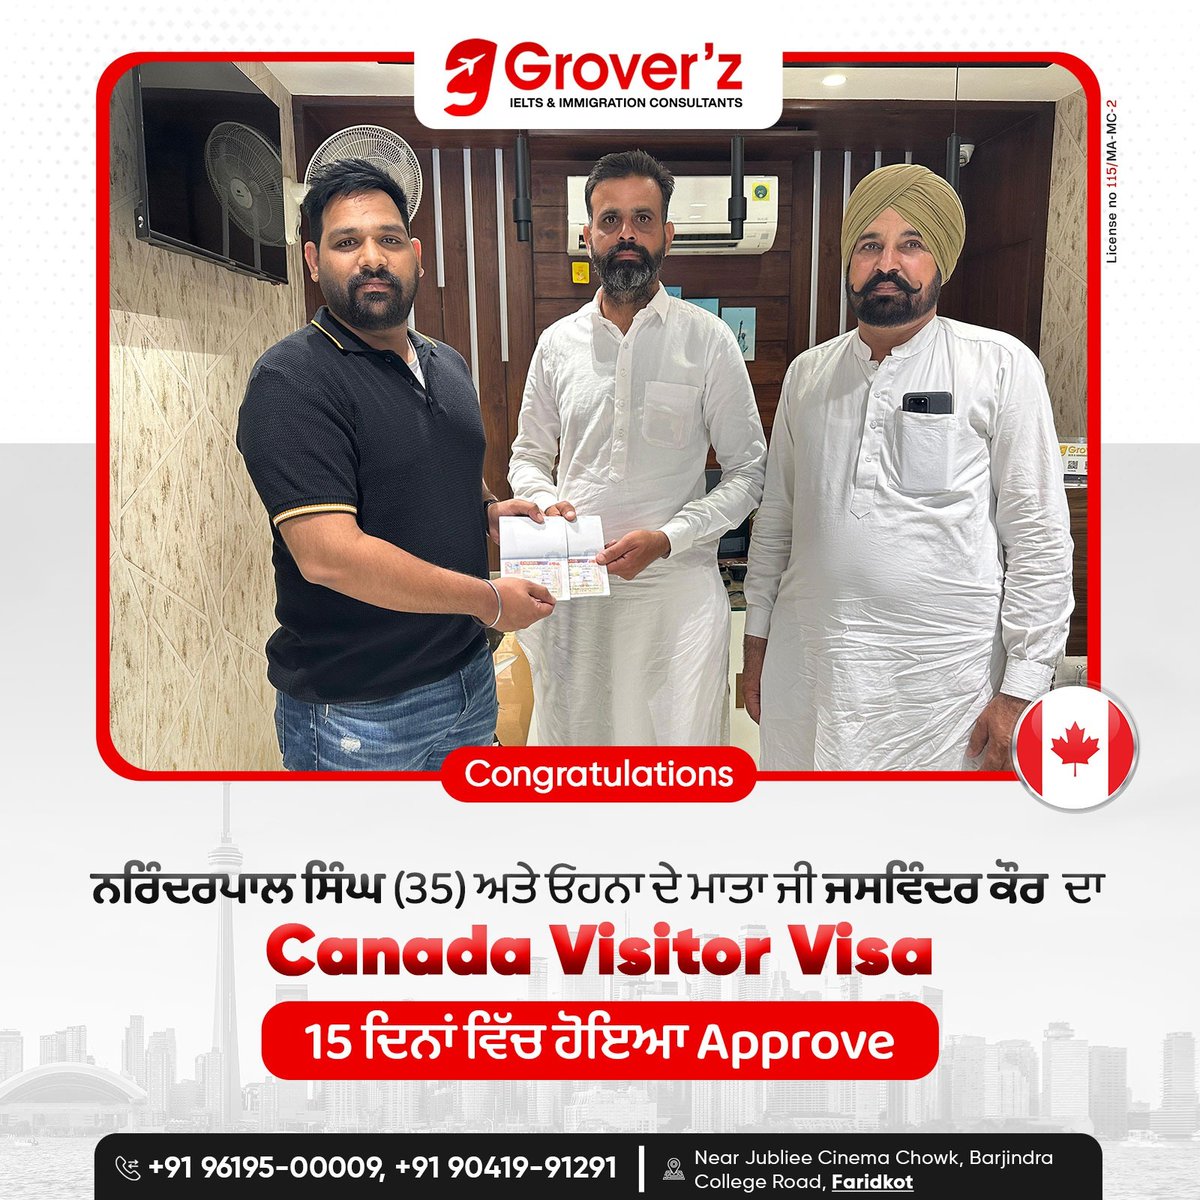 Canada Visitor Visa approved in 15 days!🇨🇦 ☎ 96195-00009, 90419-91291 Visit us: groverz.in #GroverzIeltsImmigration #Canada #VisitorVisa #VisitCanada #Visaapproved #CanadaVisa